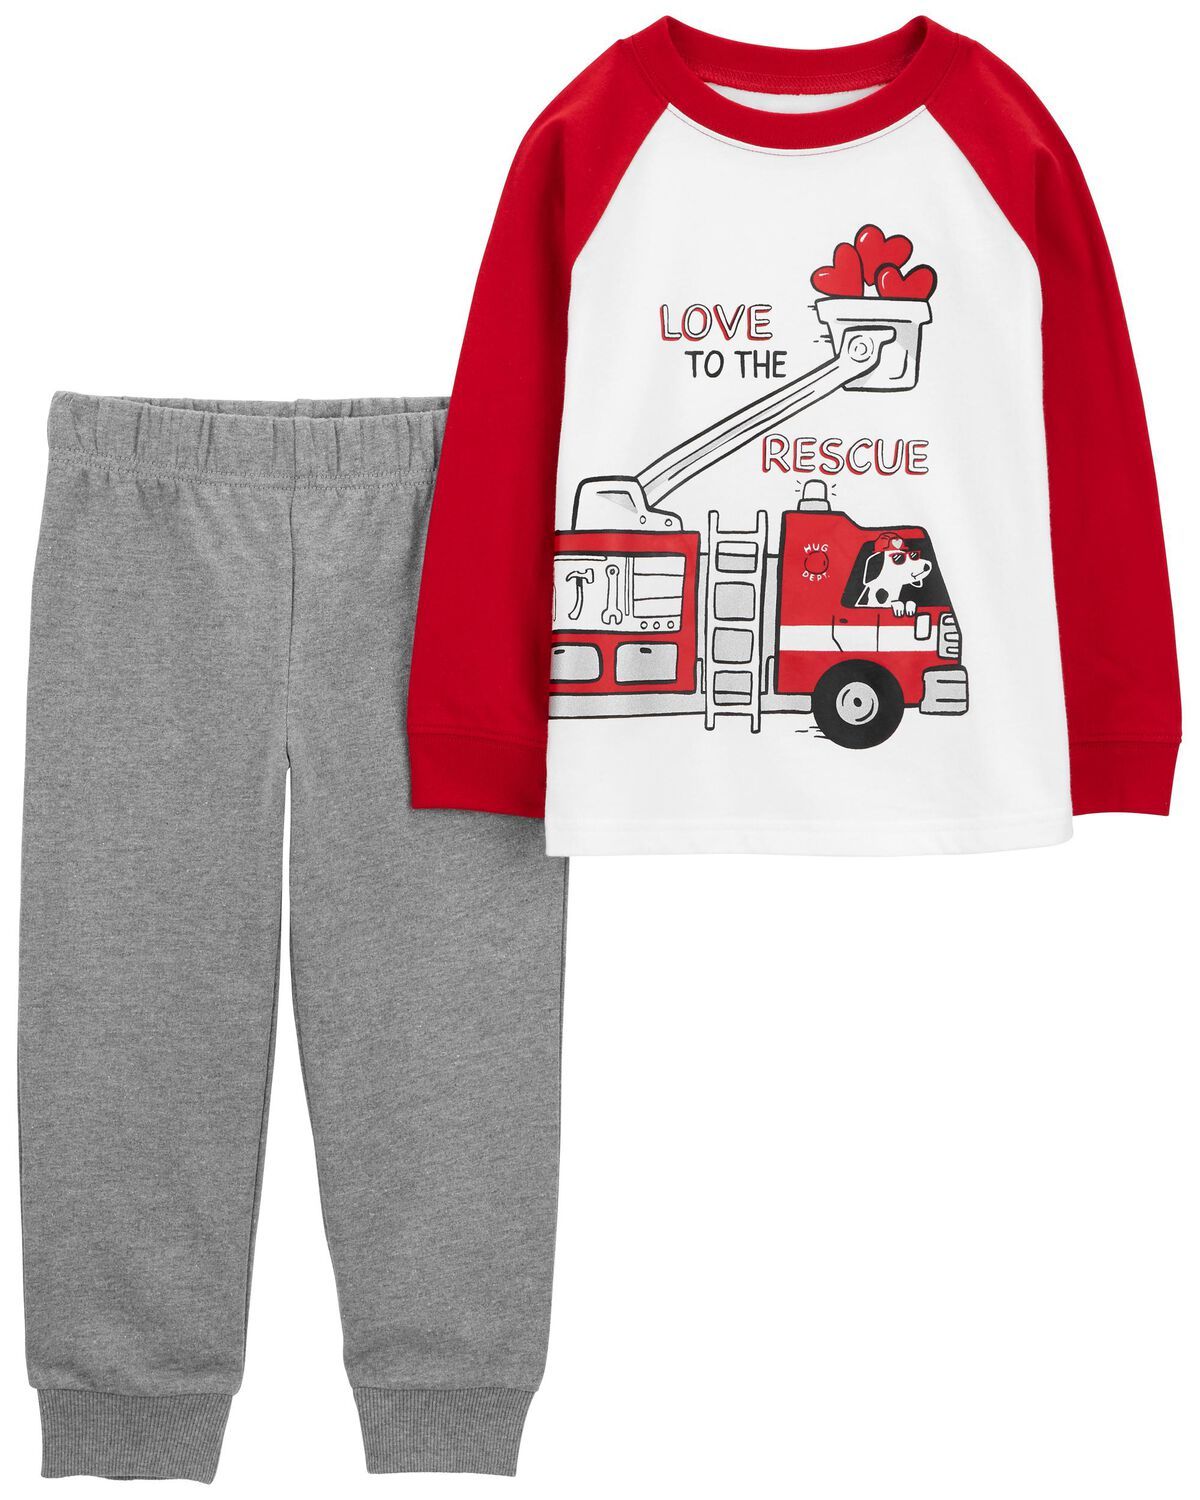 Red Baby 2-Piece Valentine's Day Fire Truck Top and Pants Set | carters.com | Carter's